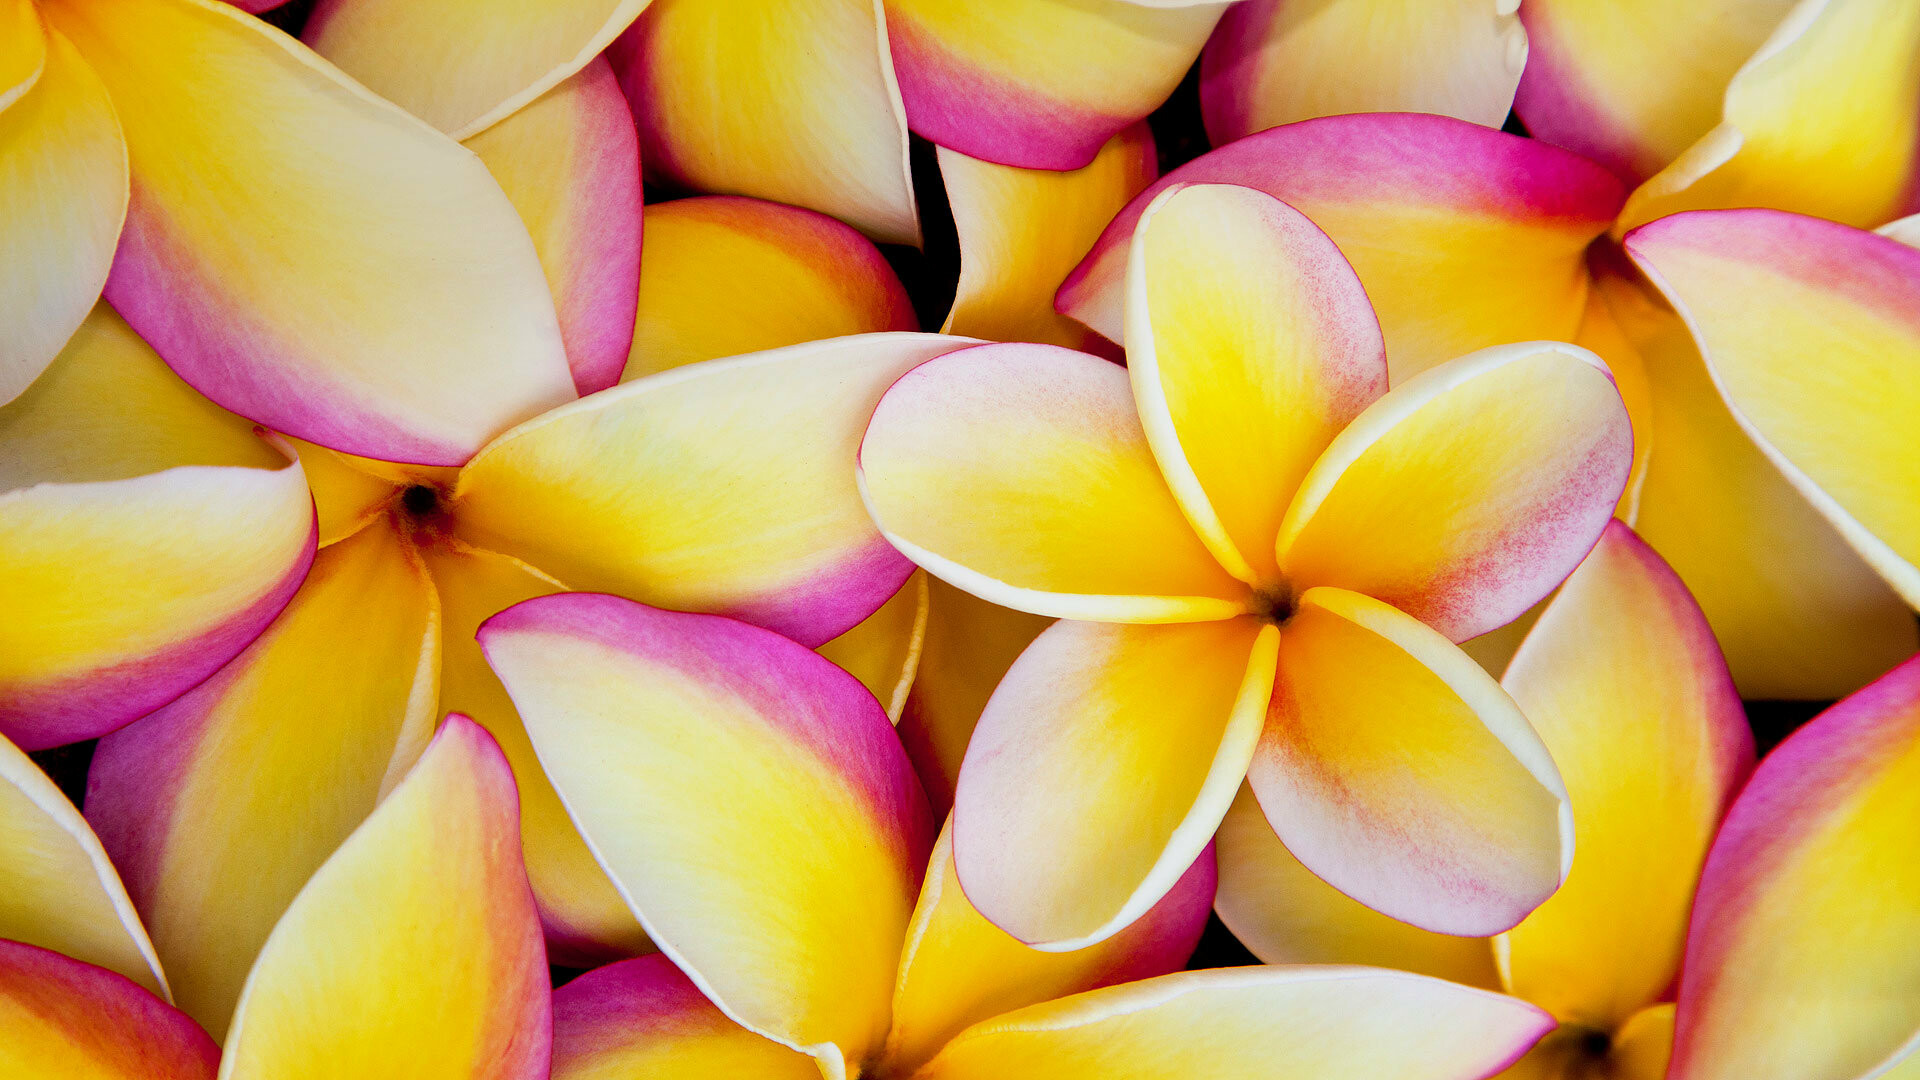 Frangipani Flower: Their plump, soft, five petals partially overlap each other and gently swirl outward, giving these blooms a sculpted appearance. 1920x1080 Full HD Wallpaper.